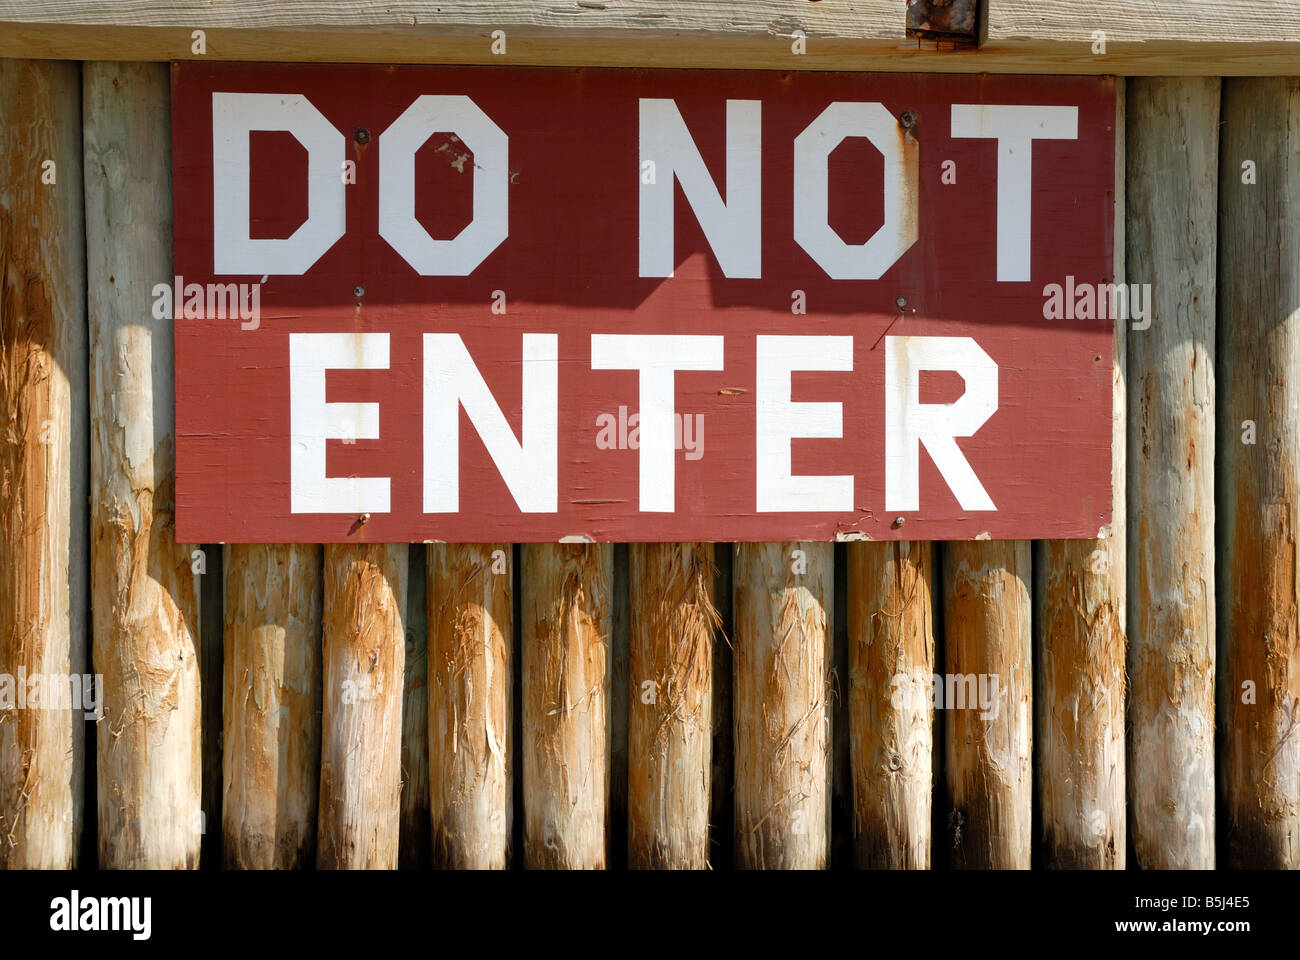 Do Not Enter sign on the wooden wall Stock Photo